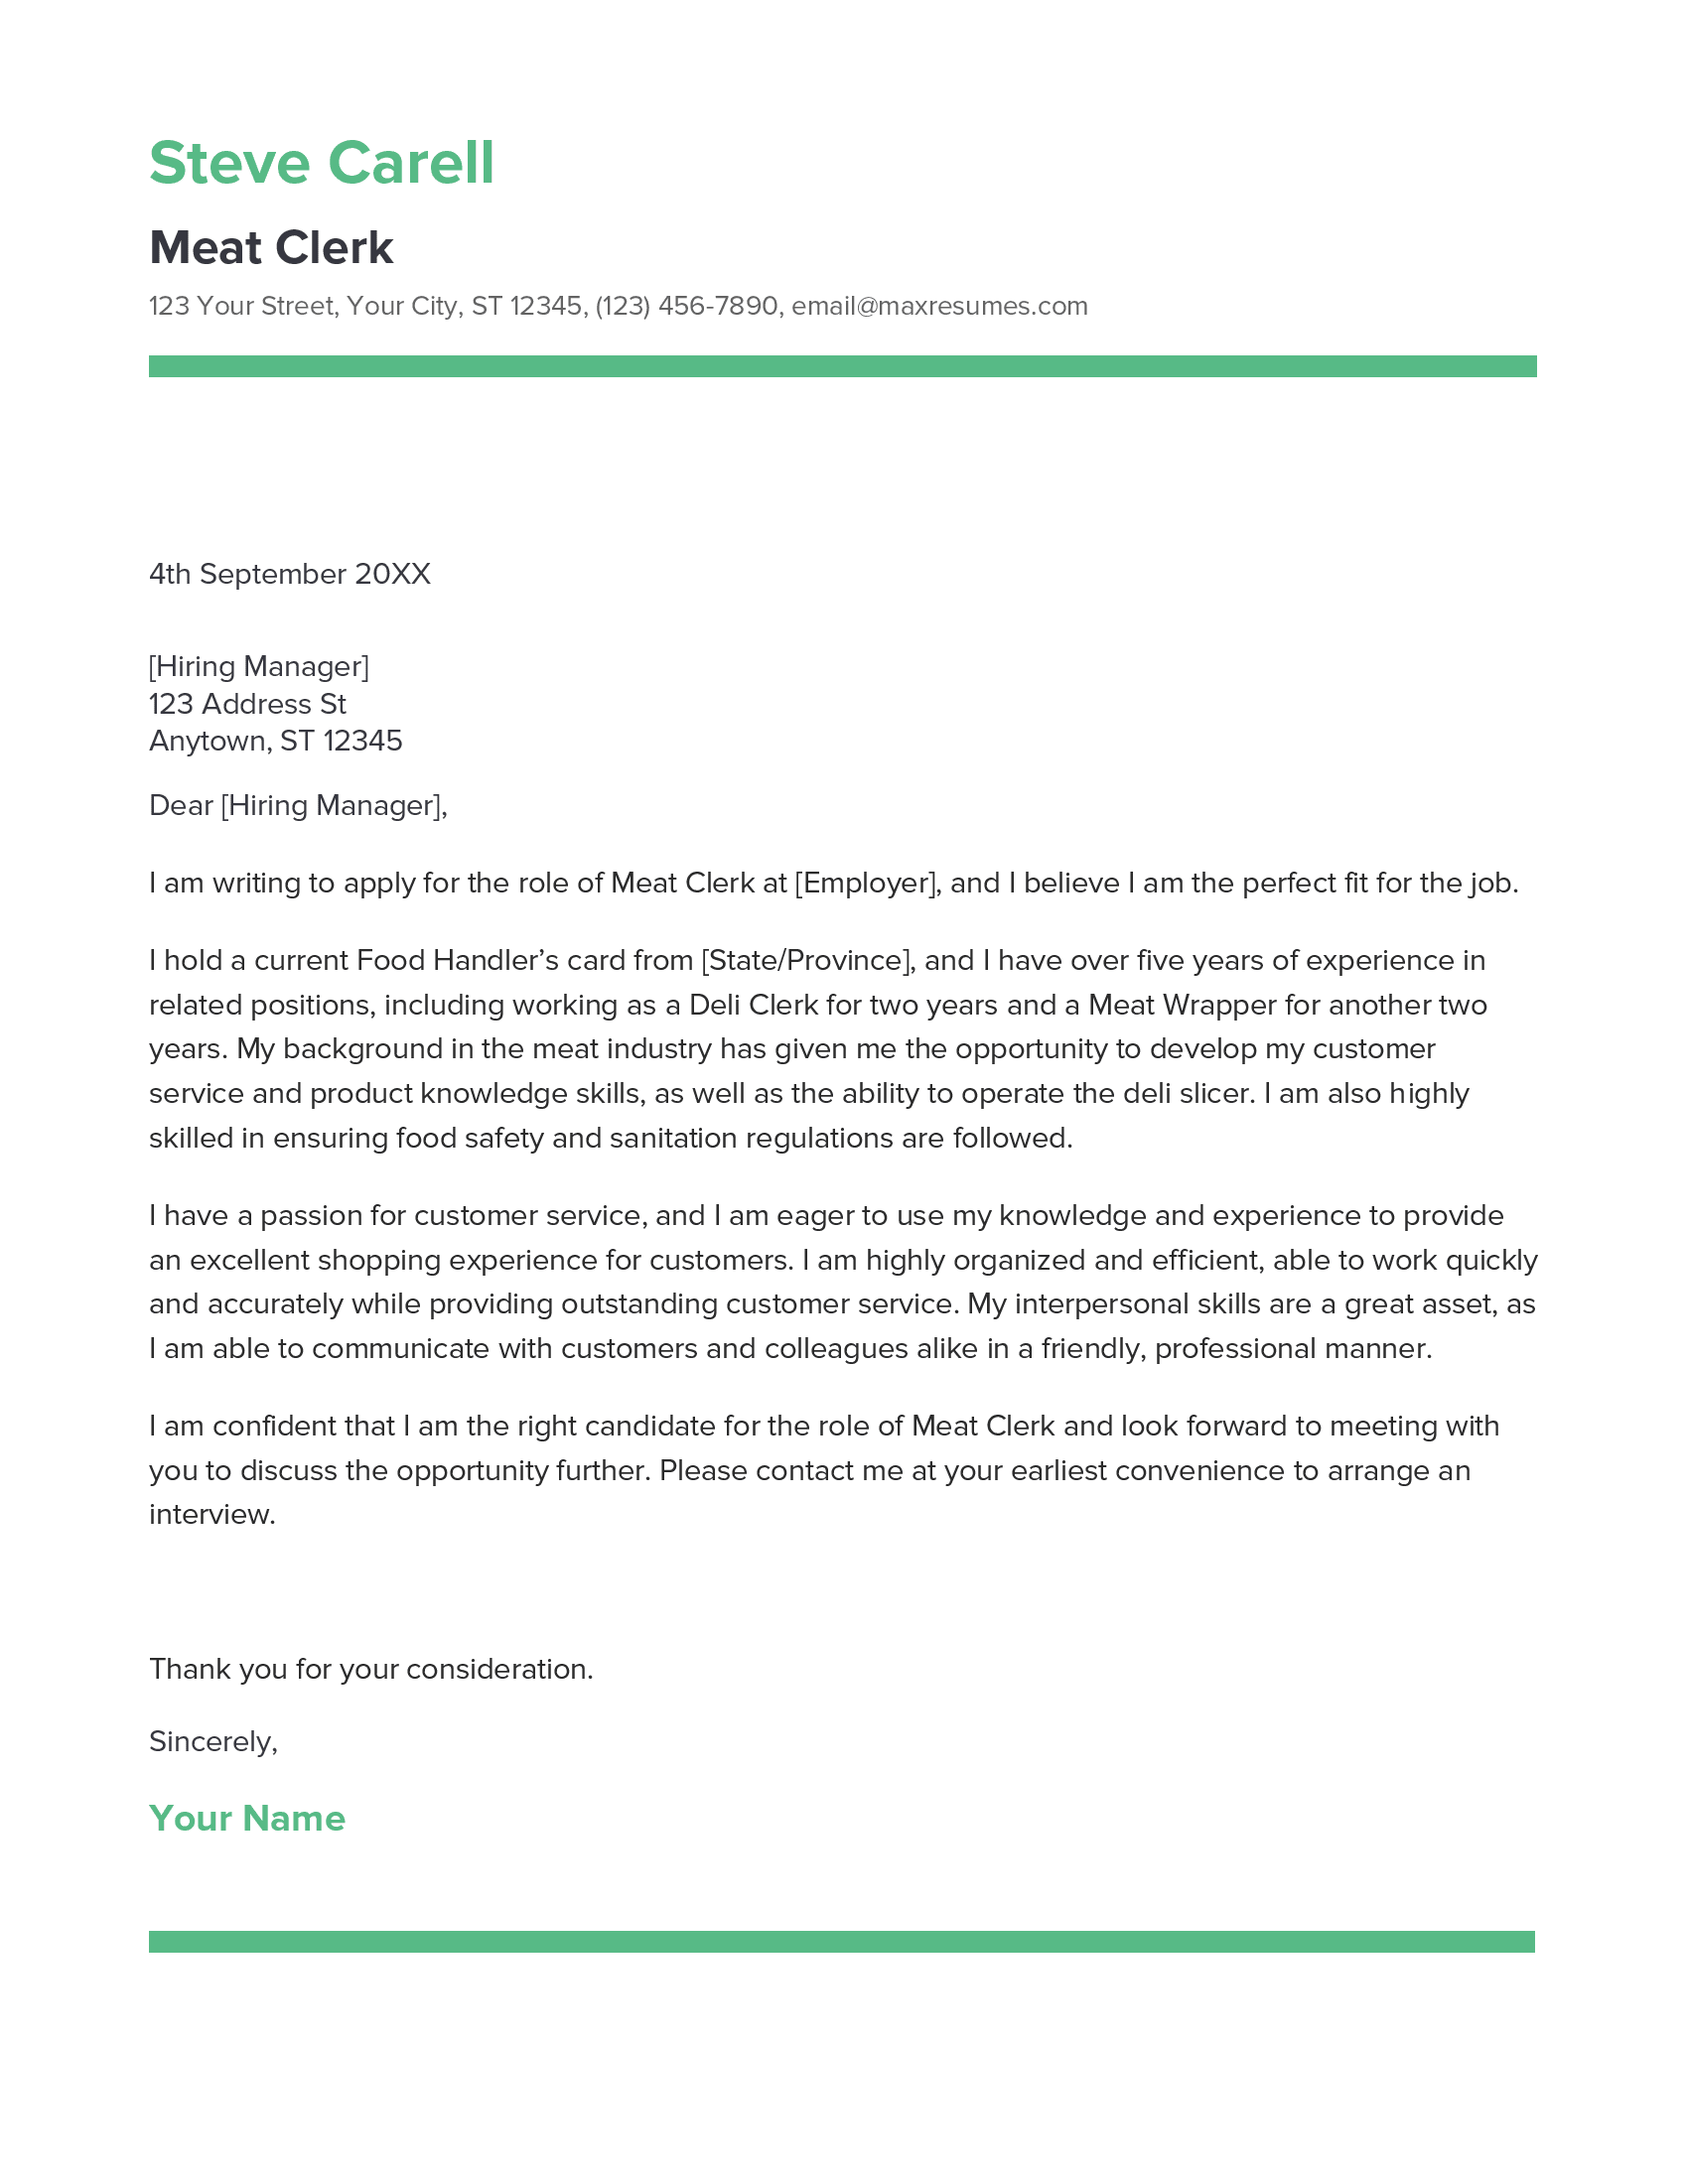 Meat Clerk Cover Letter Example